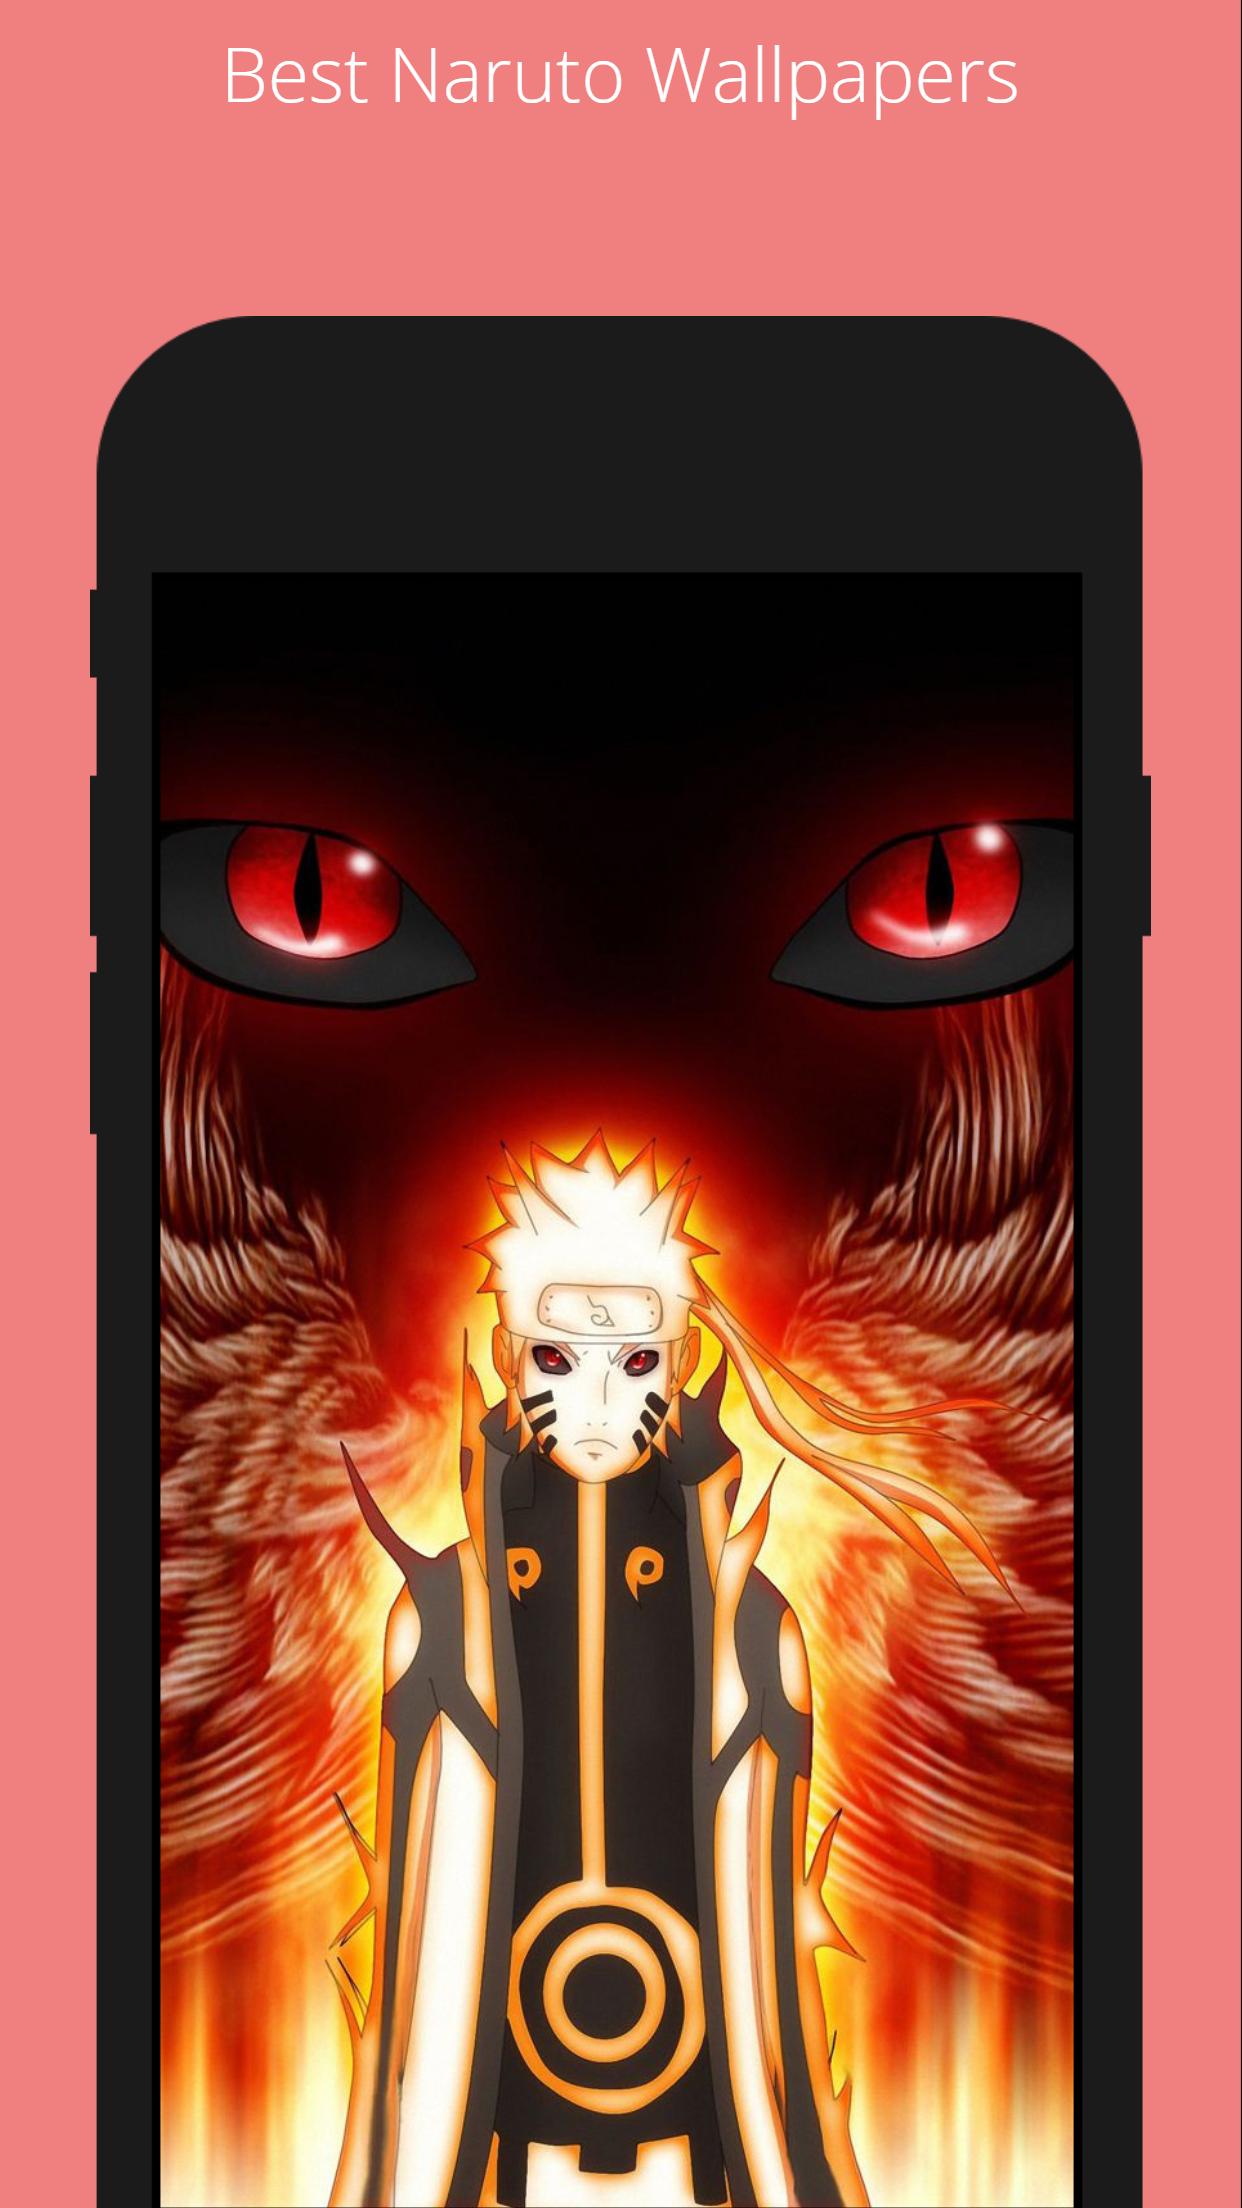 4K Best Naruto Wallpaper for Android - APK Download